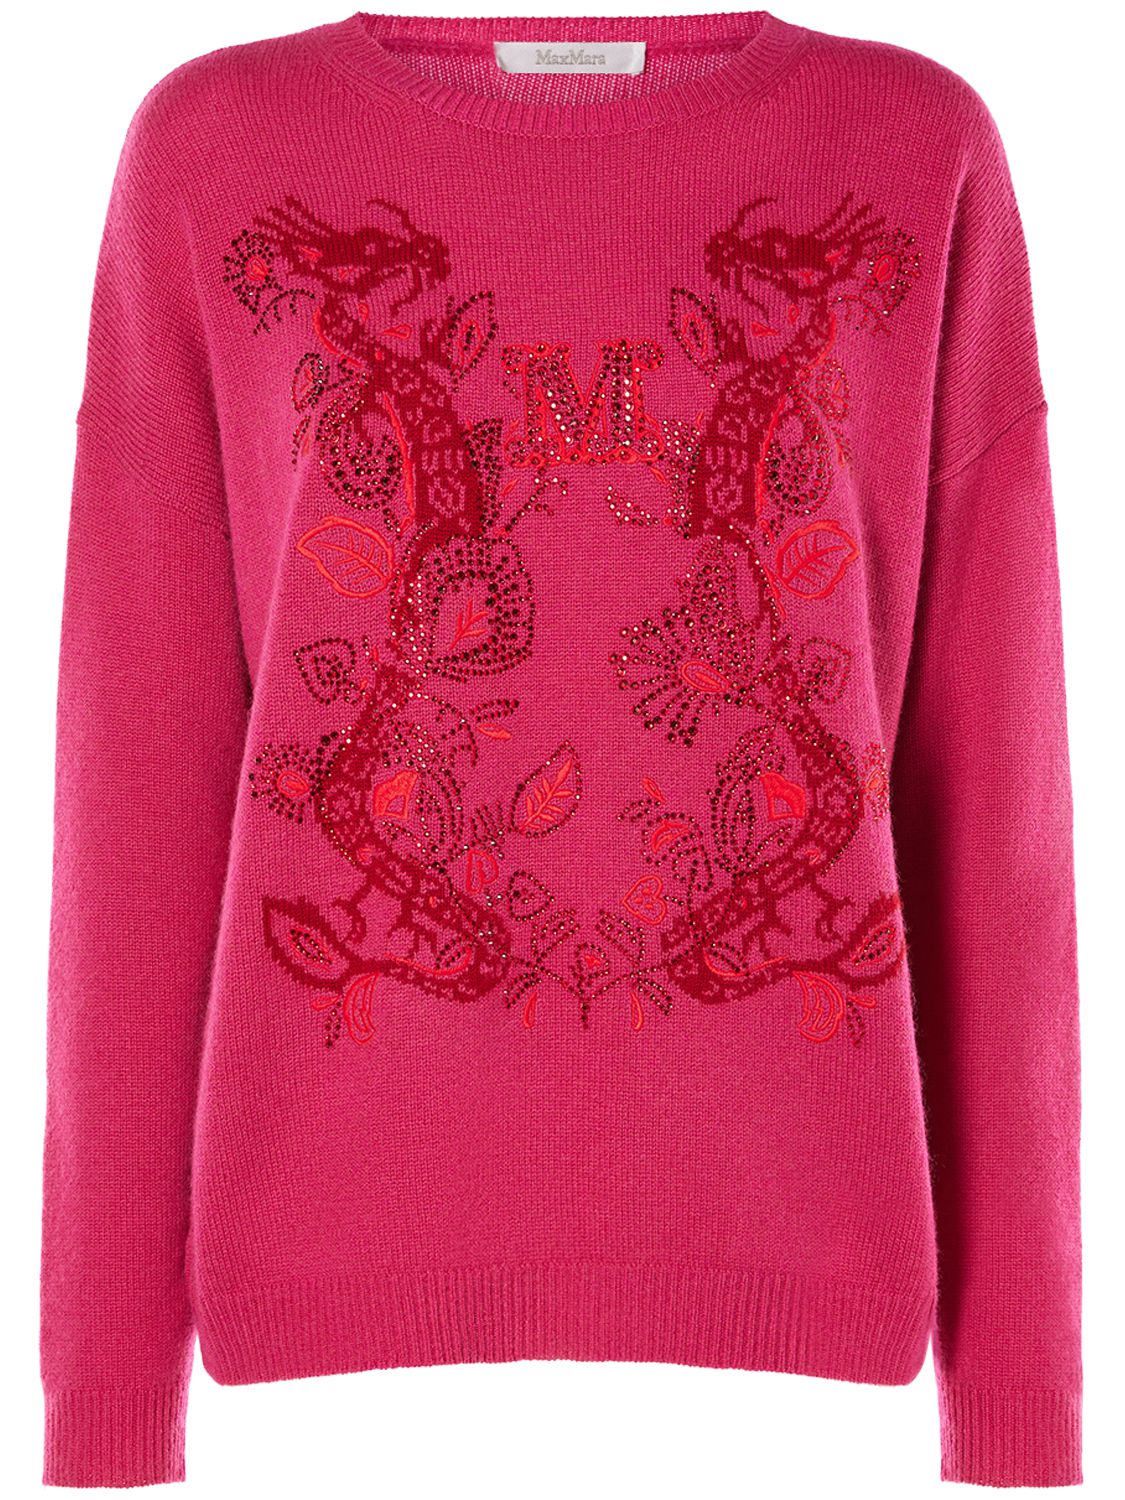 Nias Embroidered Wool & Cashmere Sweater